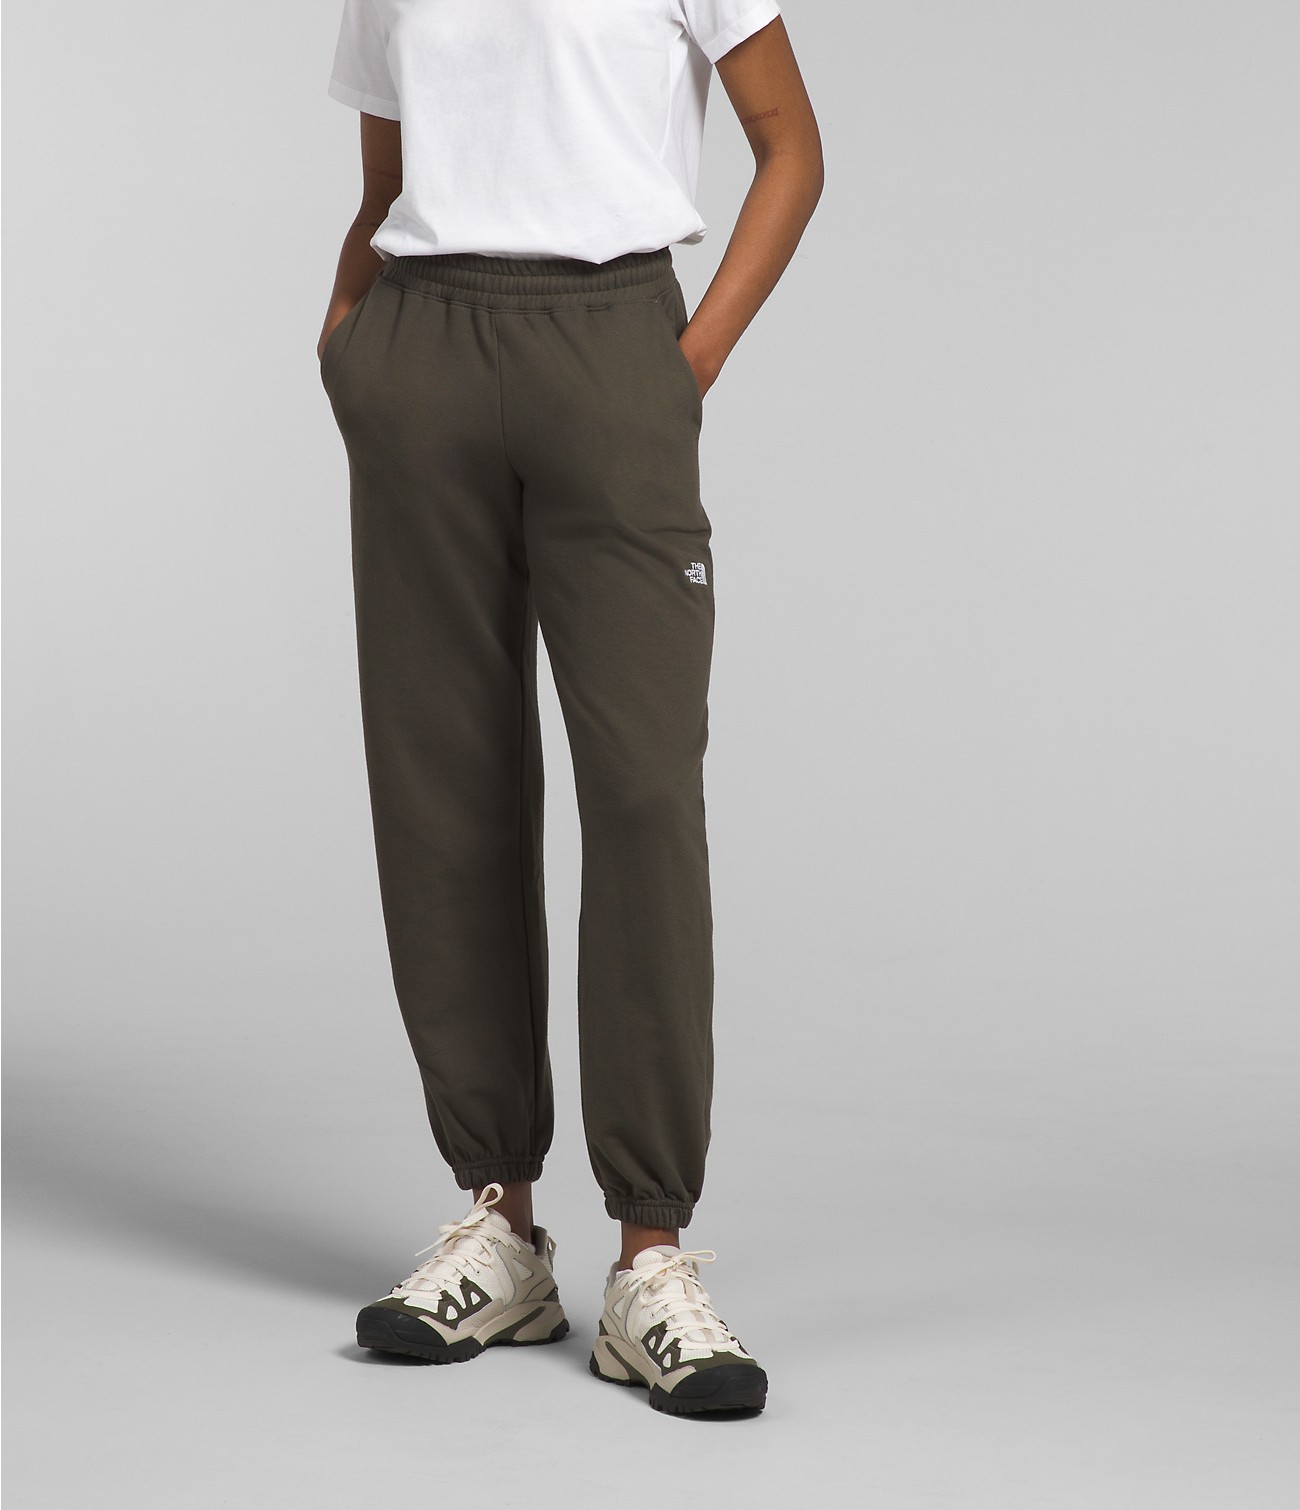 Women’s Simple Logo Sweatpants | The North Face